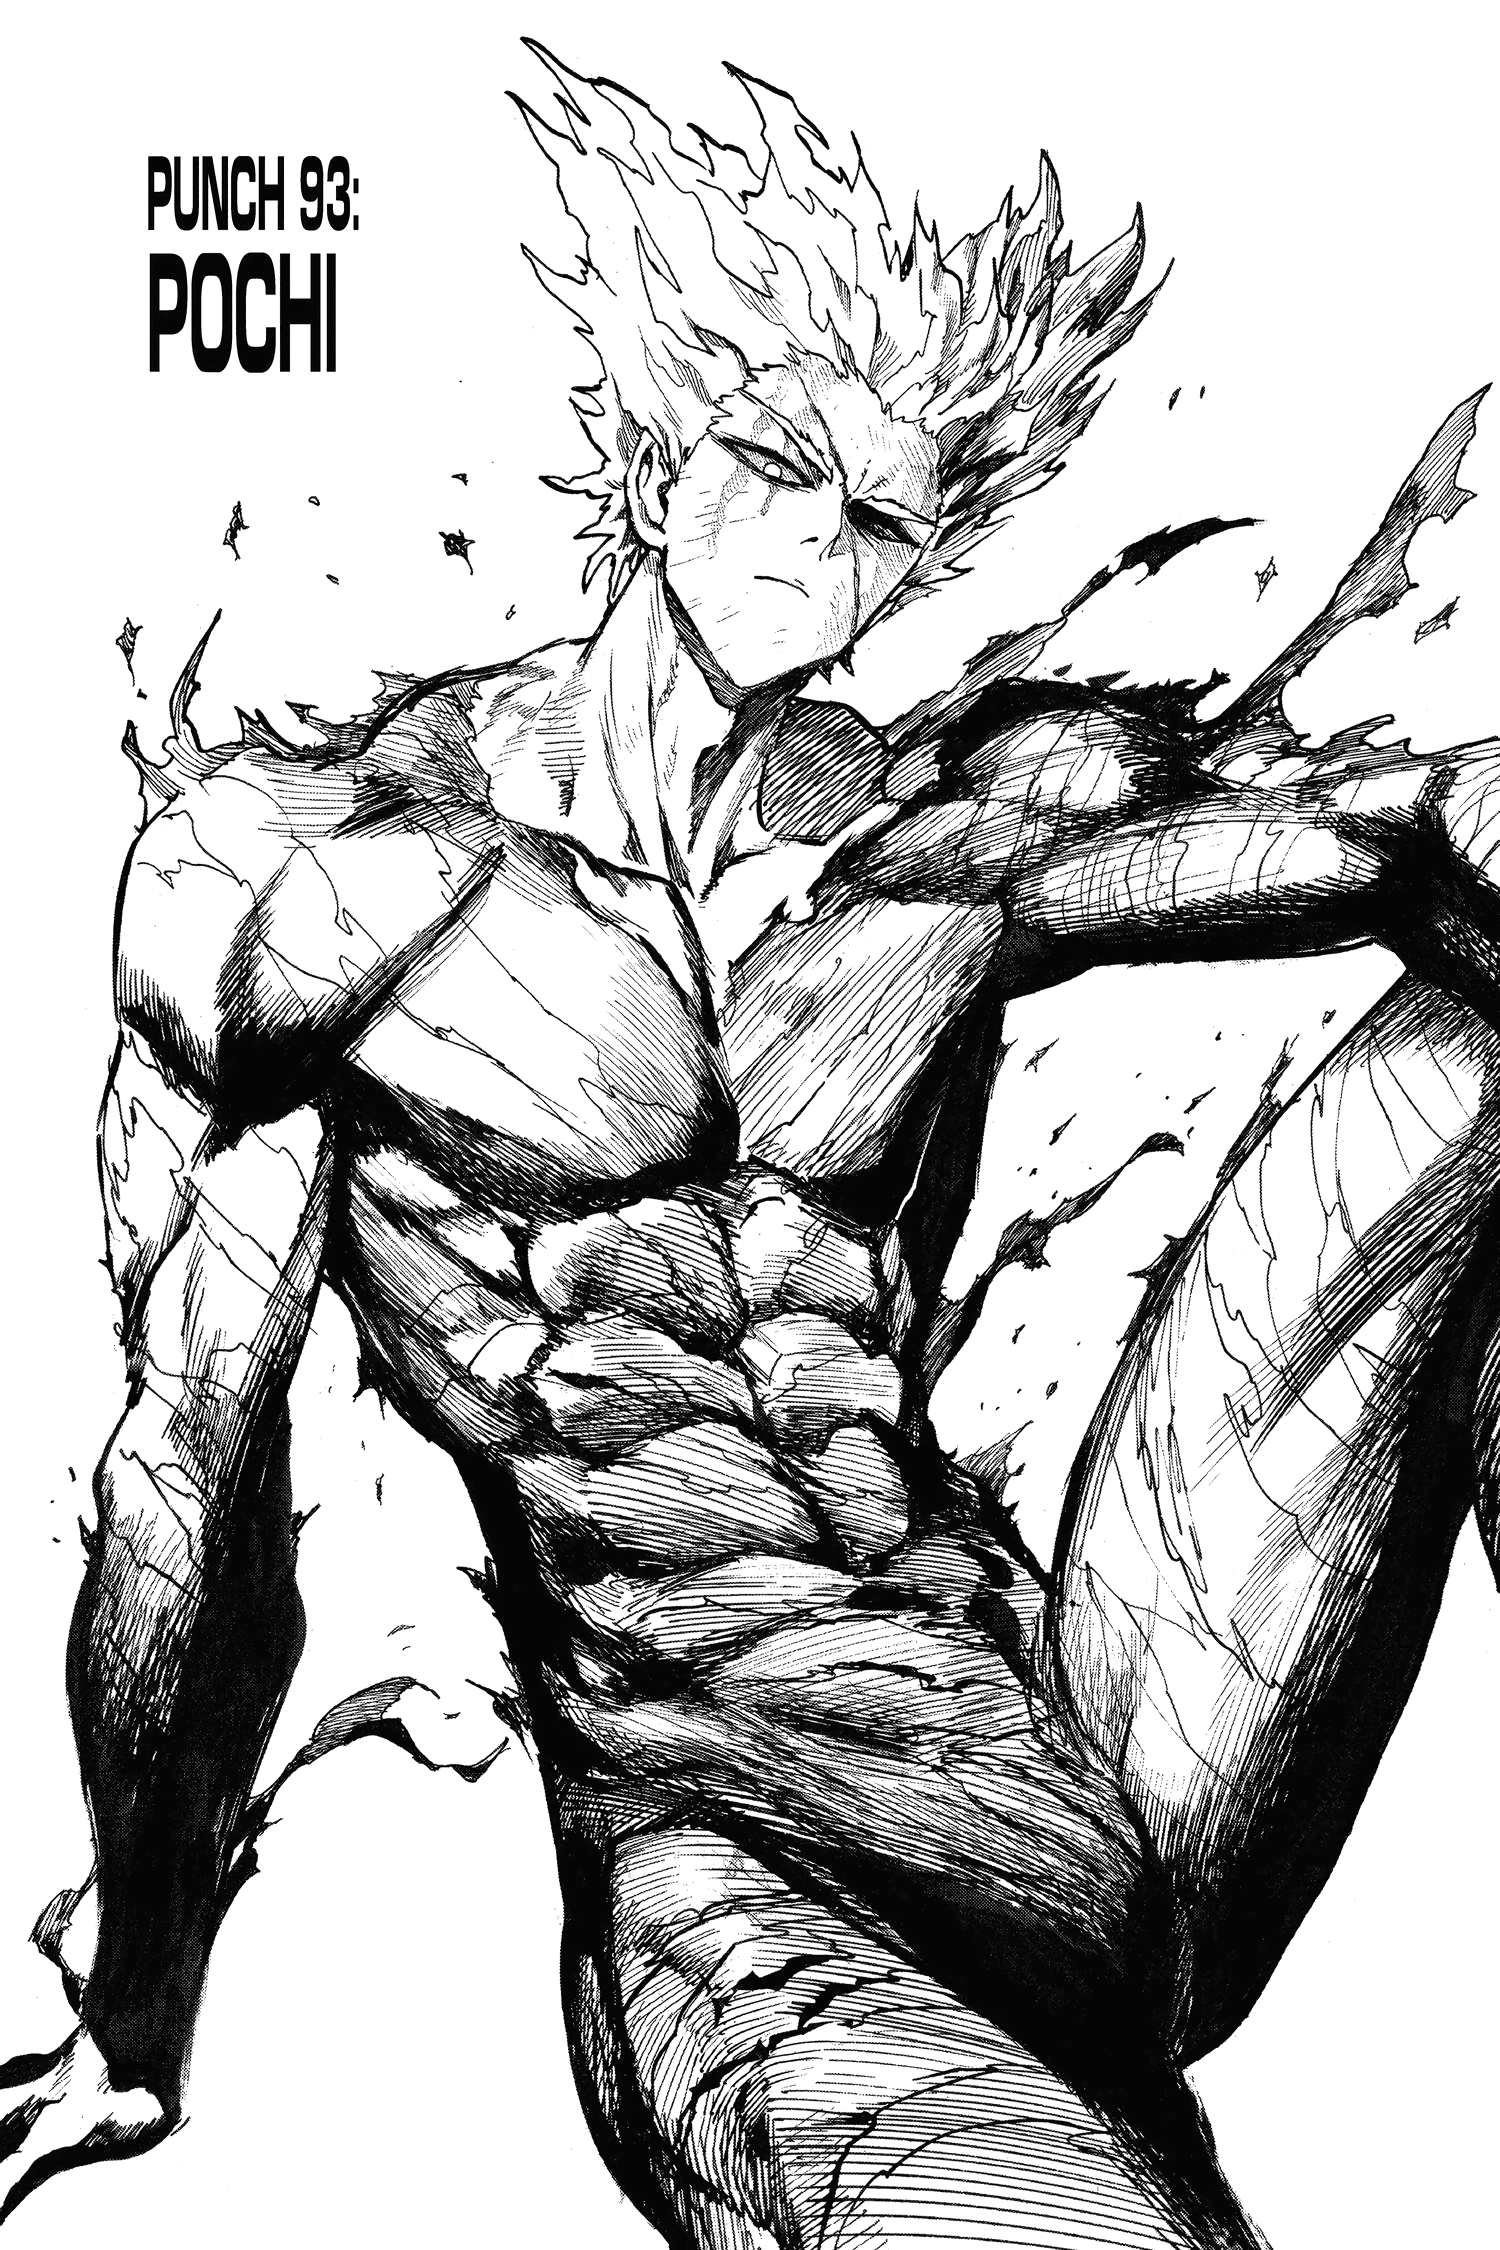 Chapter 23, One-Punch Man Wiki